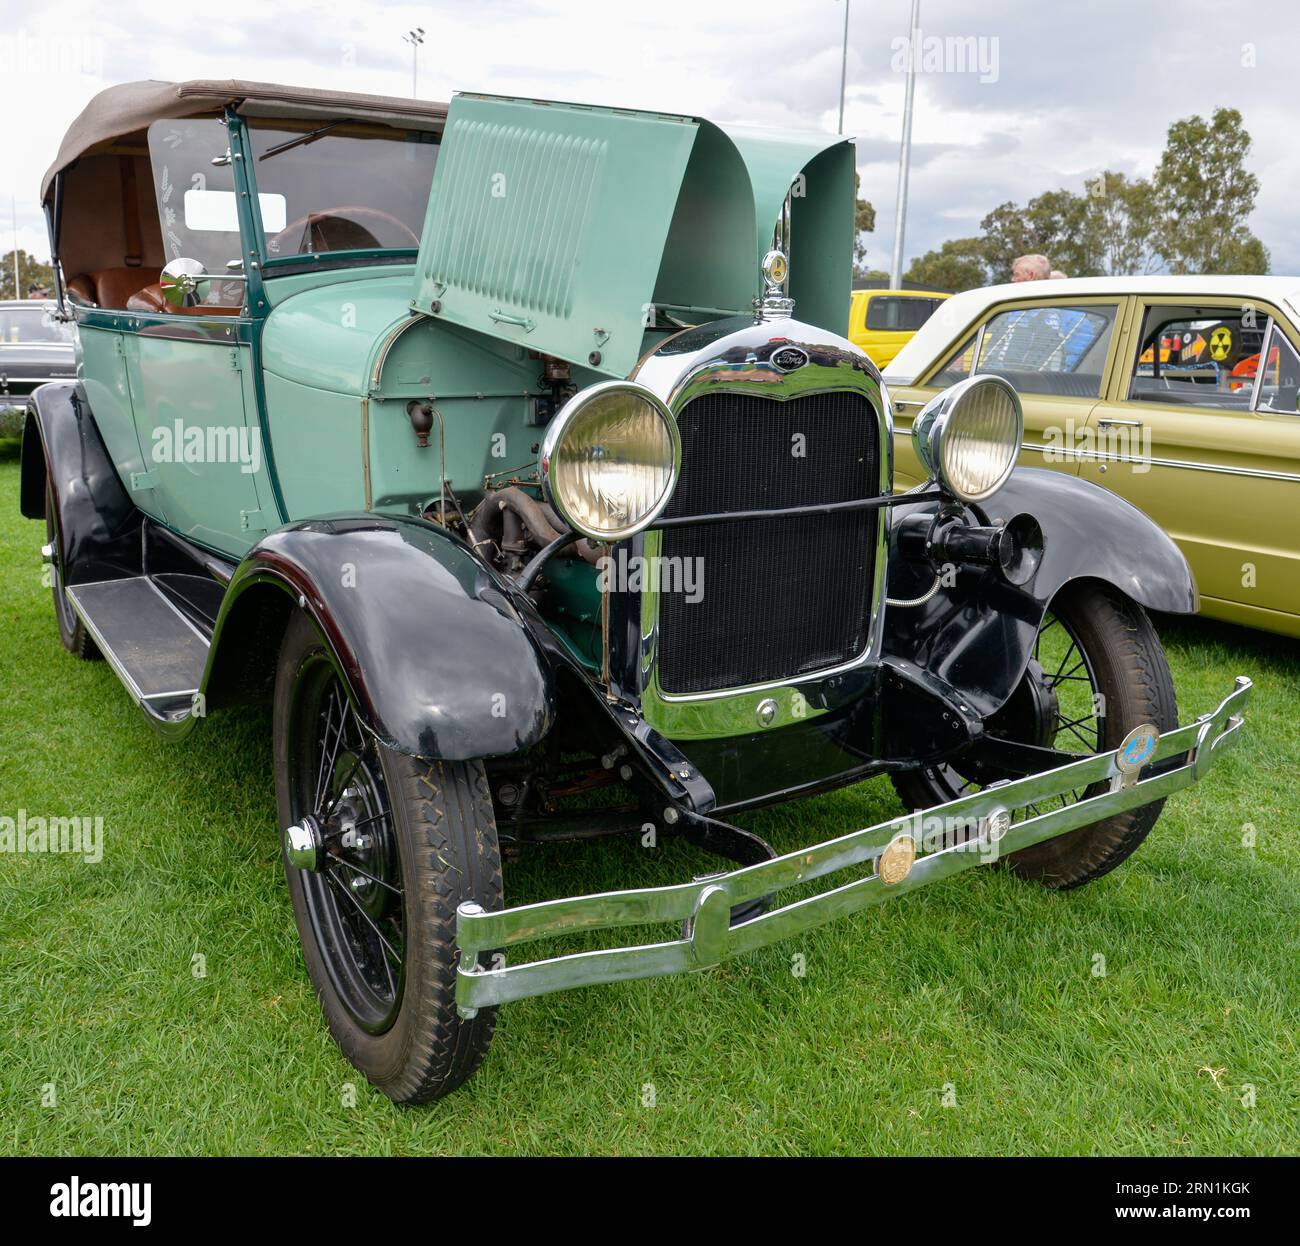 Ford Old Car Vintage Retro Show Shine Day Out, Melbourne Victoria Stockfoto